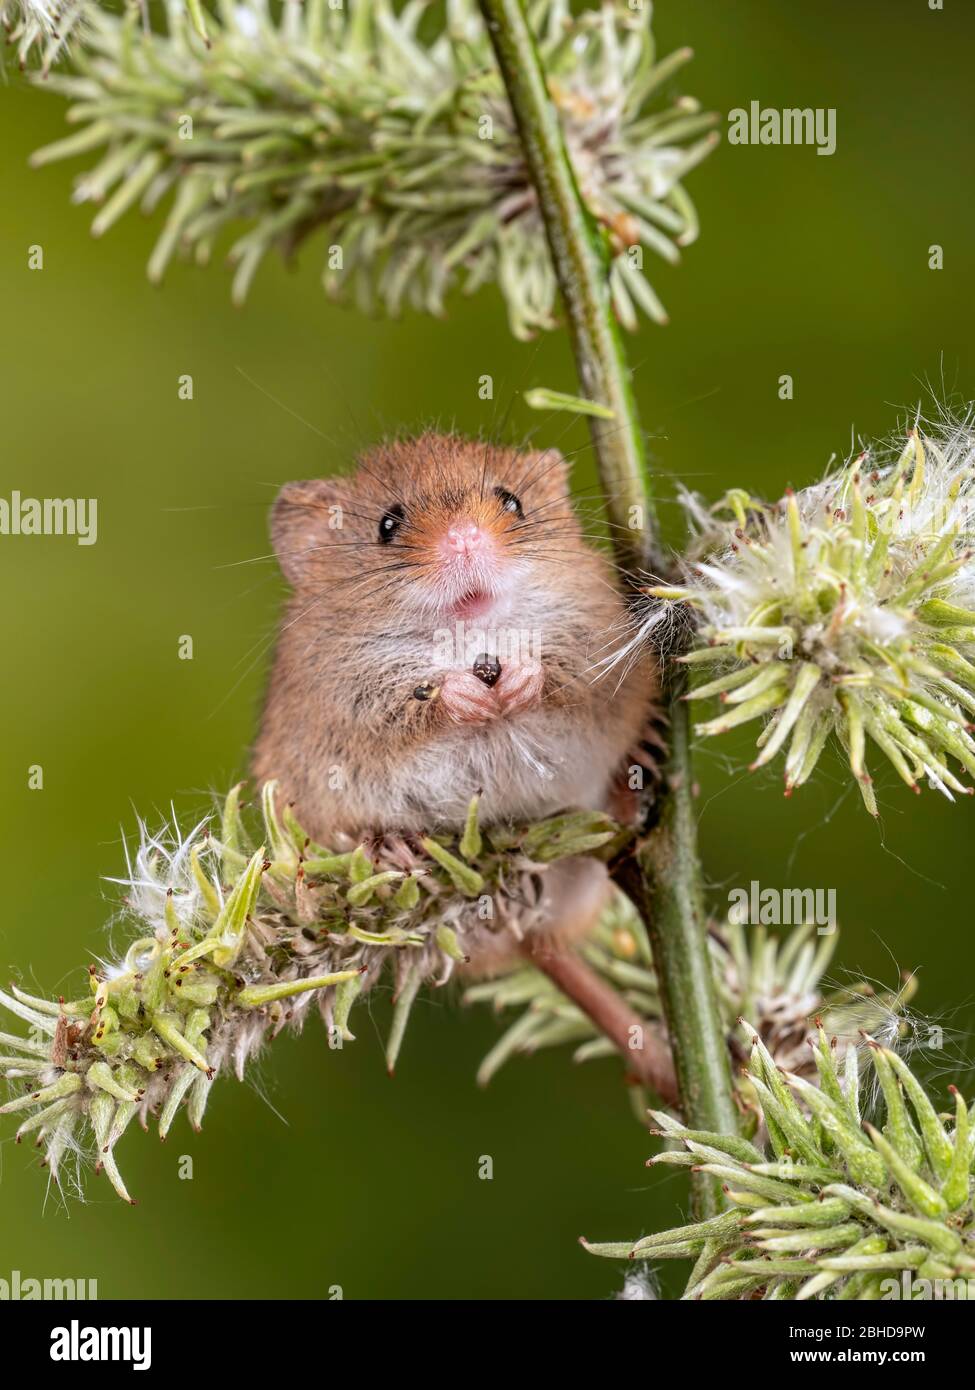 A Cute Harvest Mouse Stock Photo